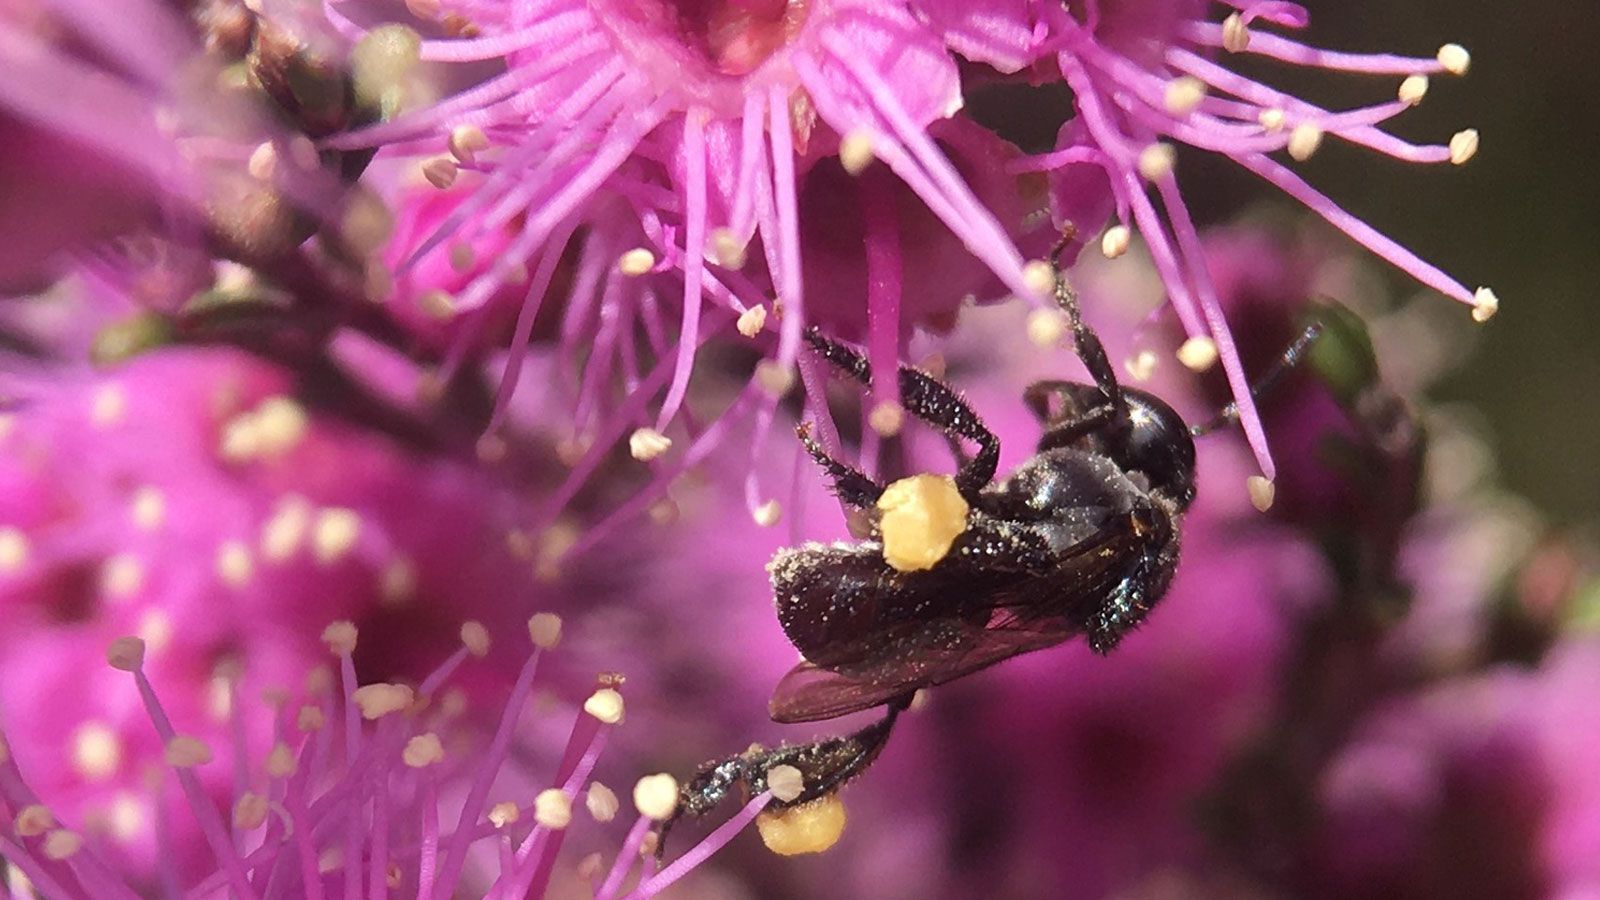 Close up image of a bee on a purple flower banner image